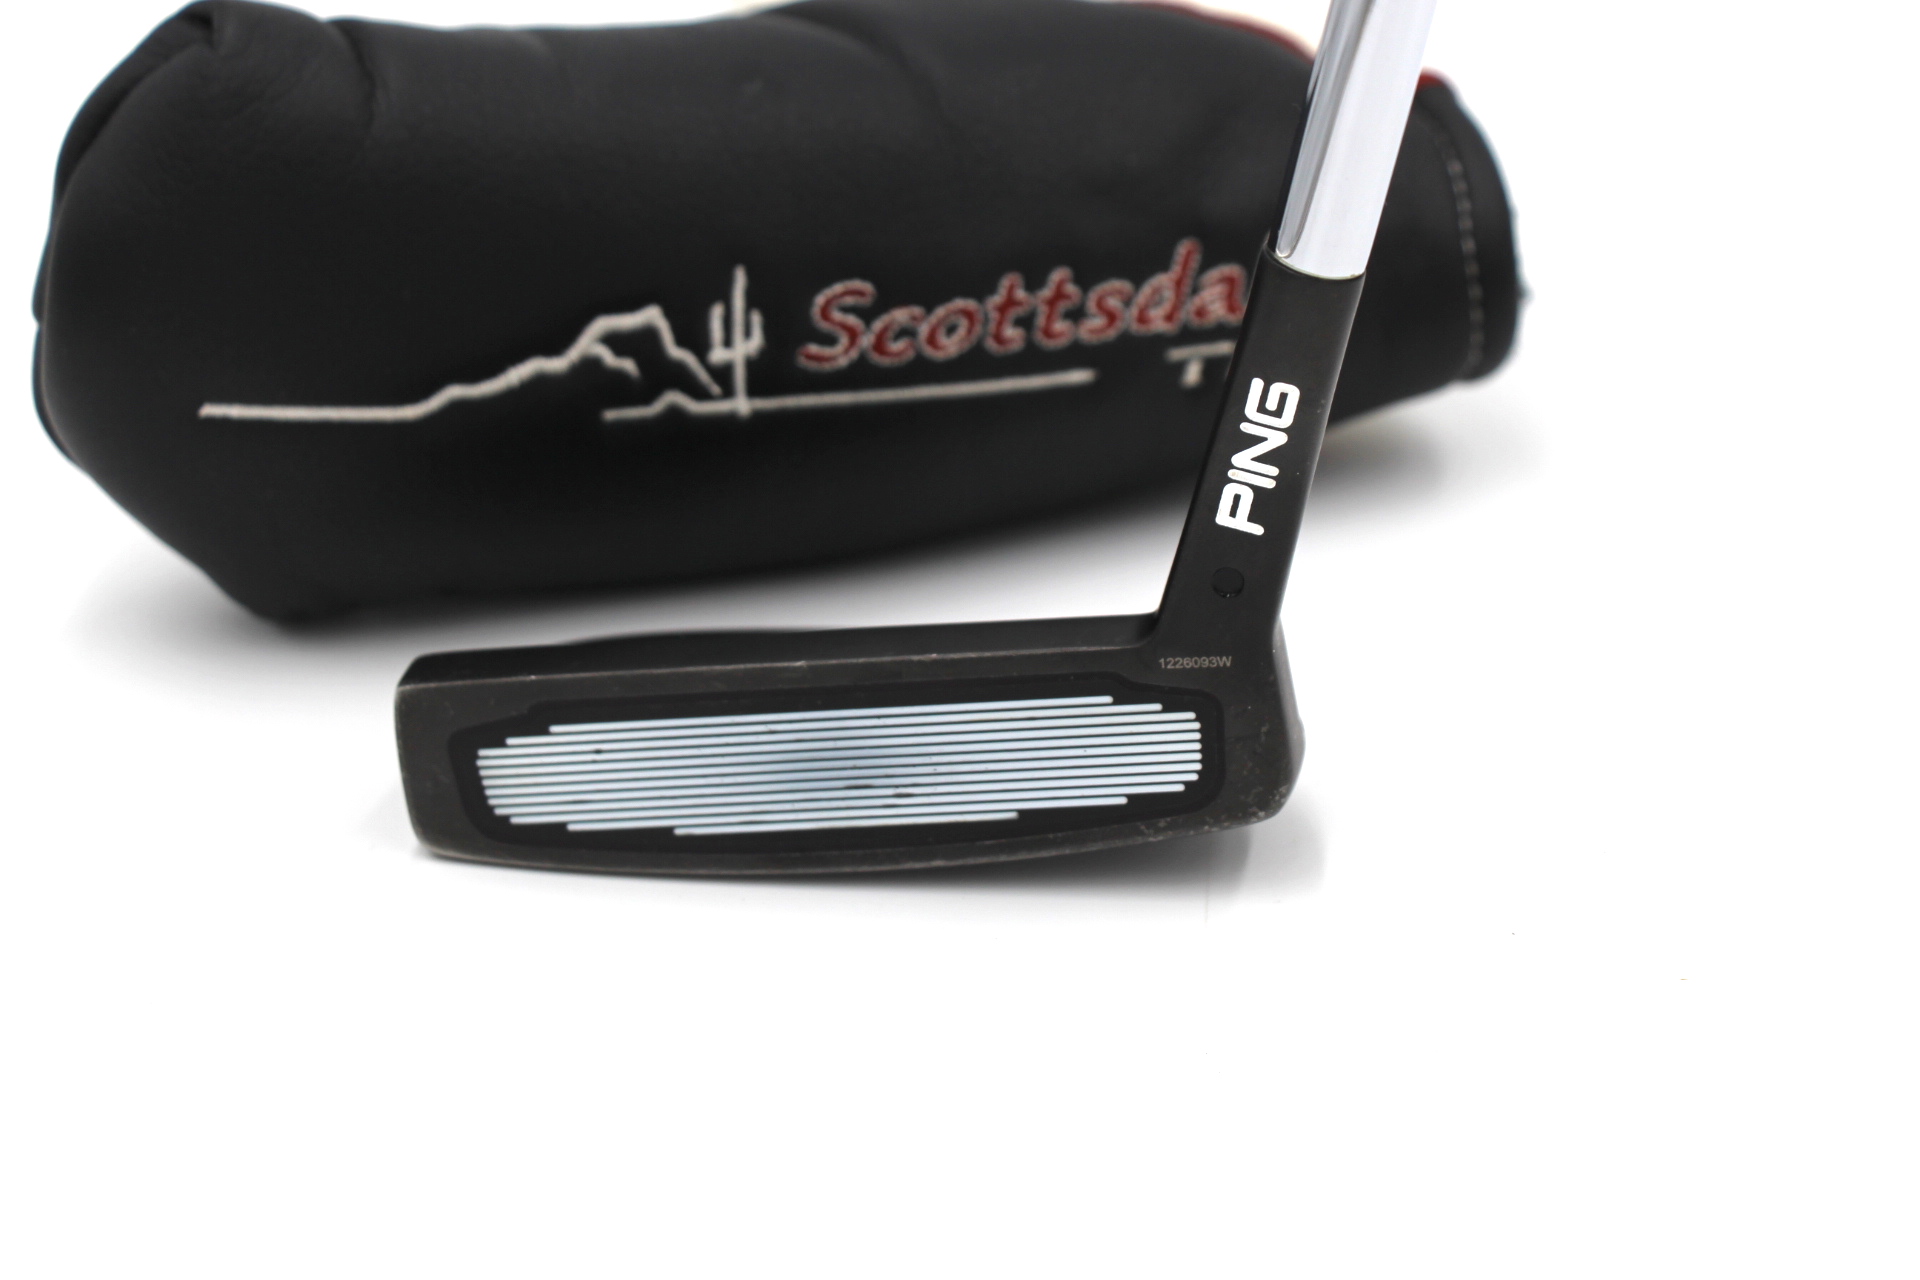 Ping Scottsdale TR Shea H Putter - Golf Geeks